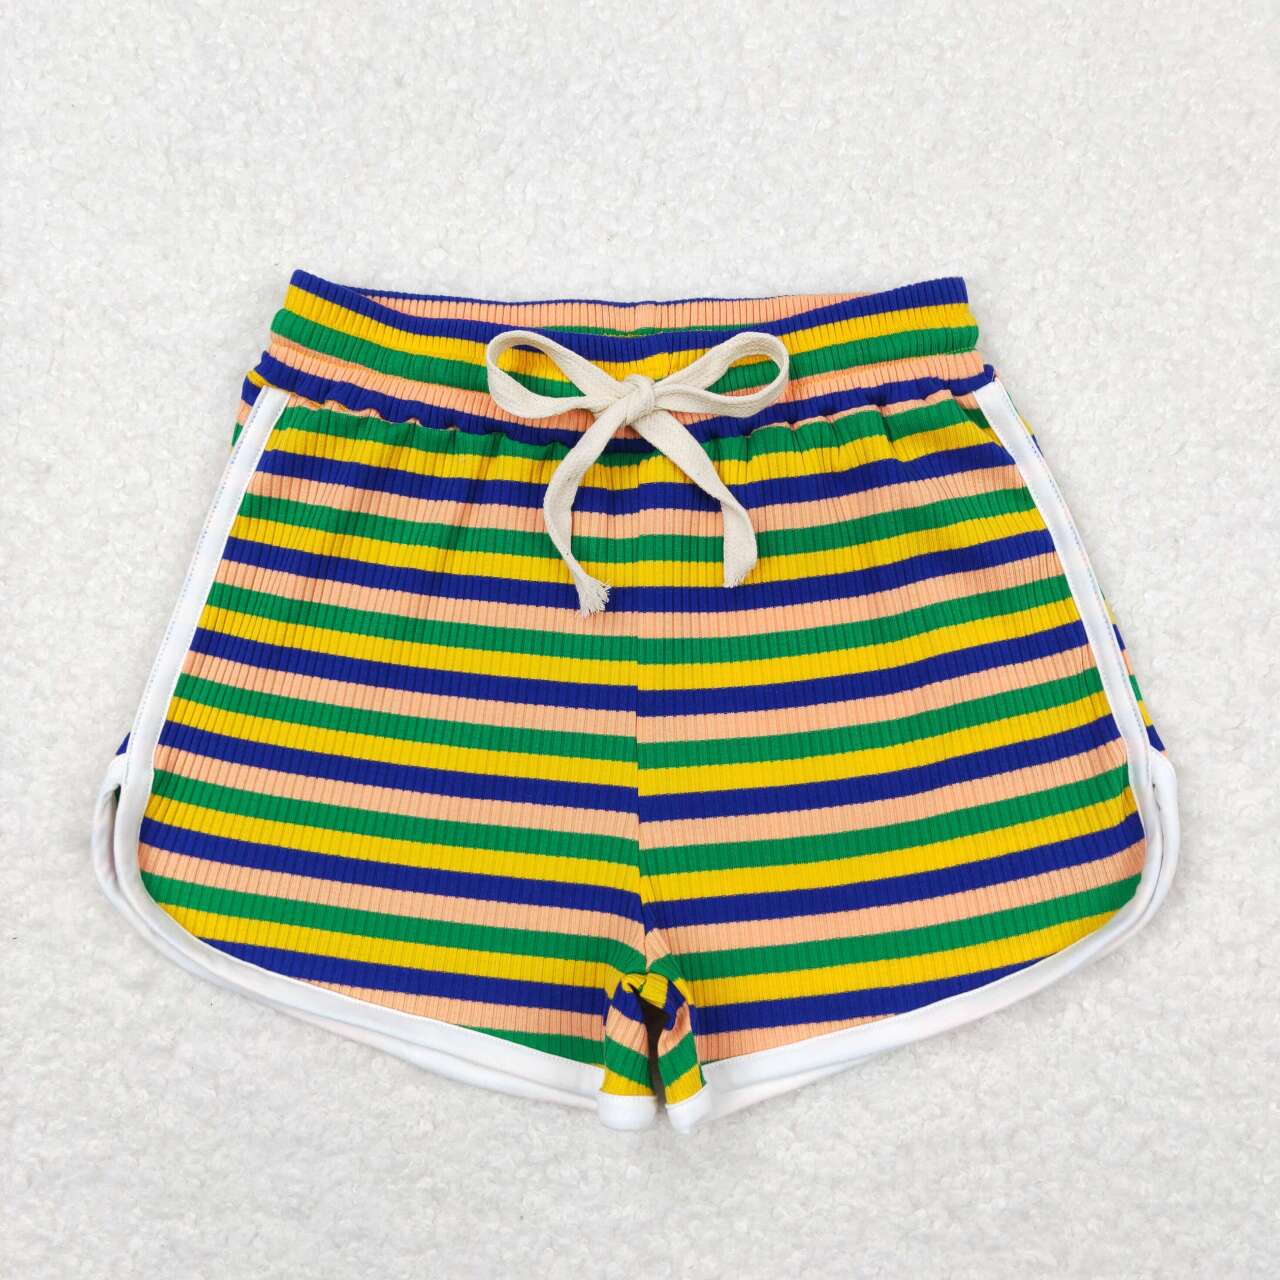 SS0339 Green, yellow, blue and orange colored thick striped shorts